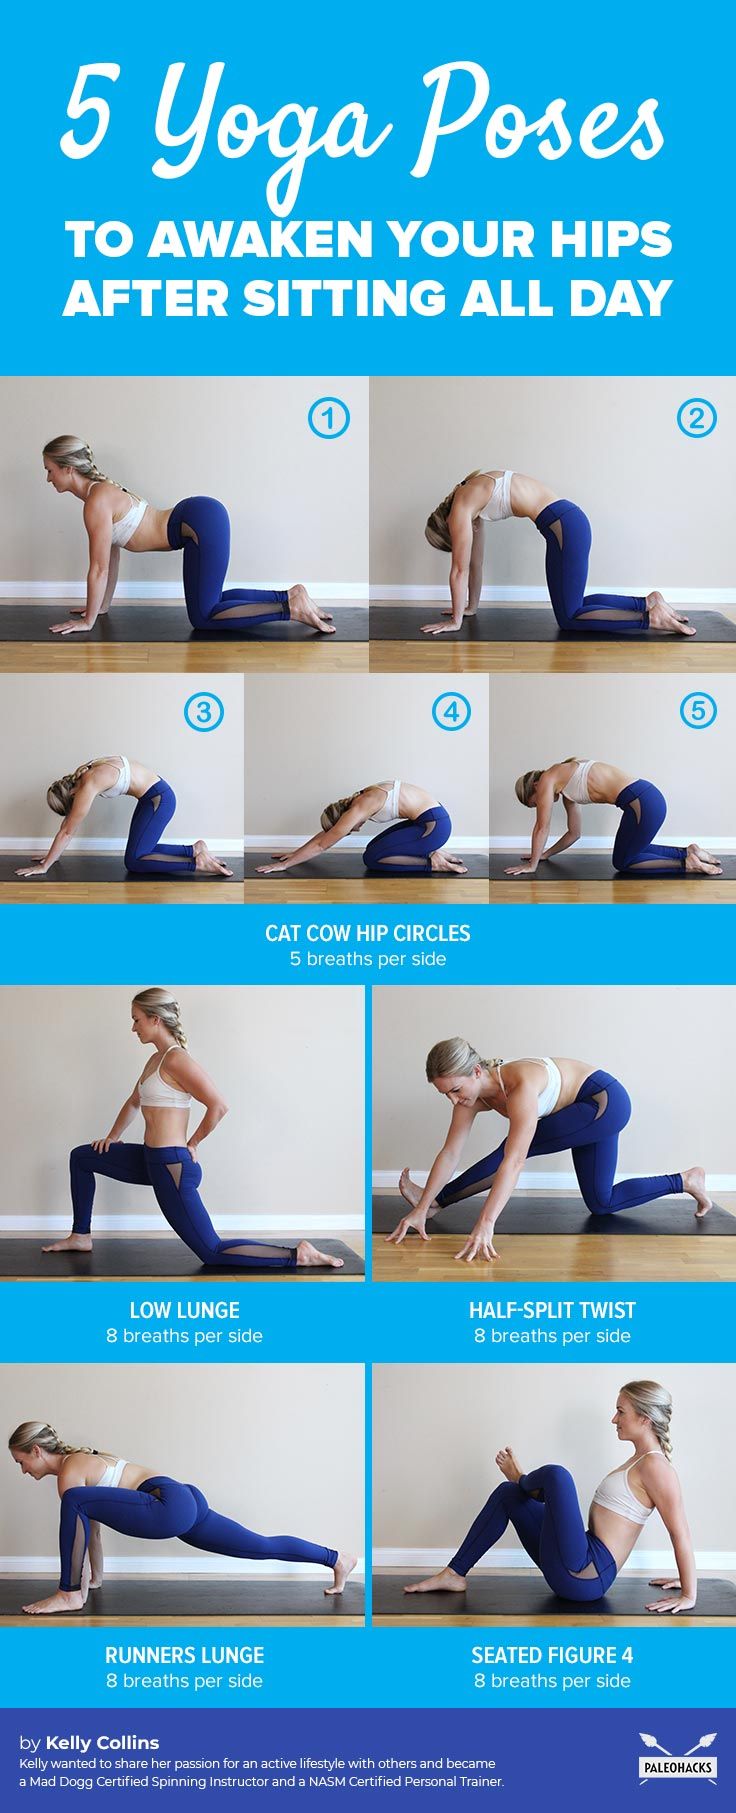 If you're at a desk all day, you're doing serious damage to those hip fl...